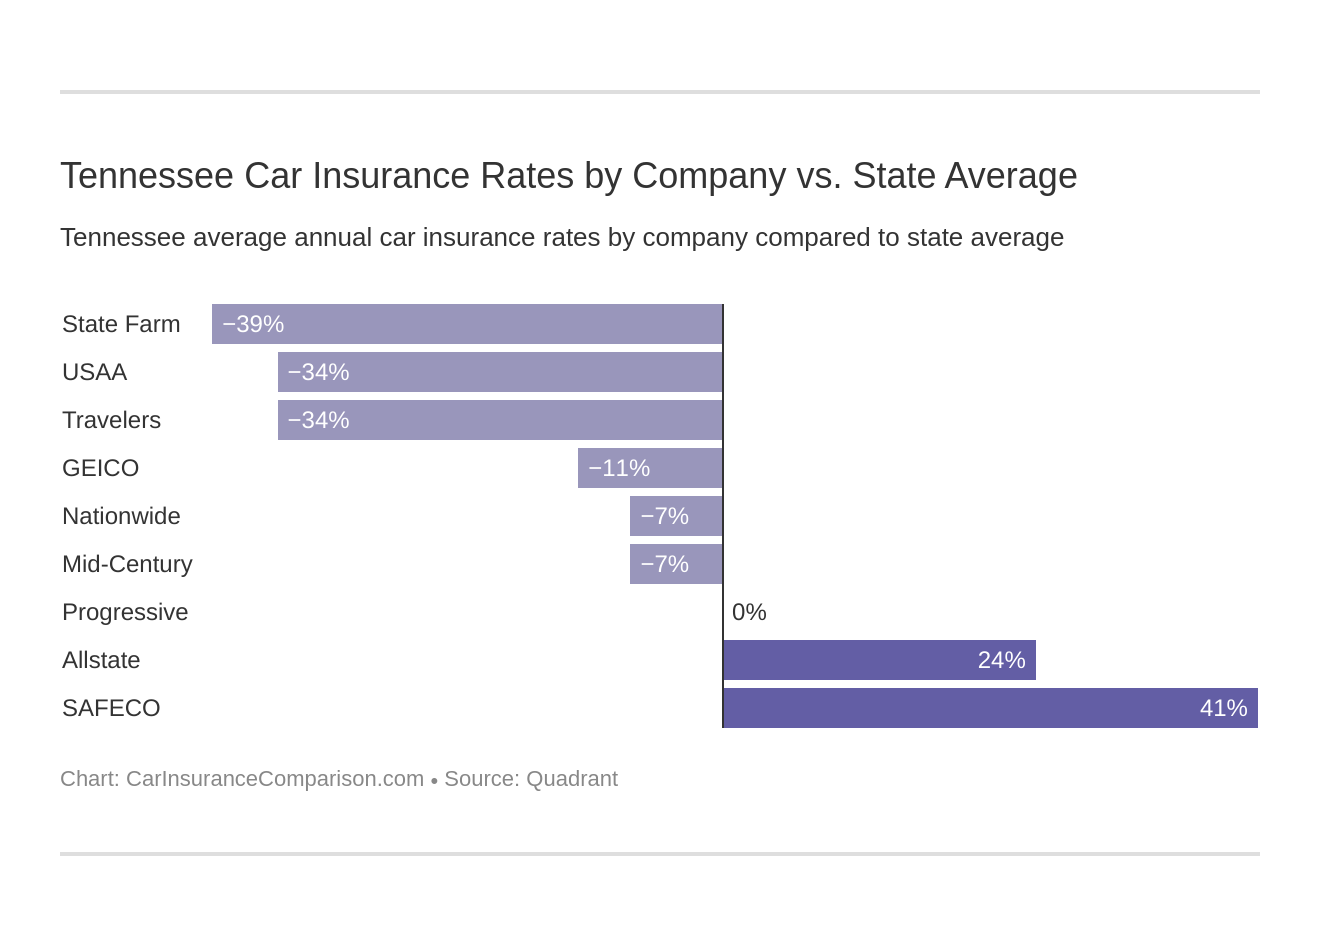 Tennessee Car Insurance Rates by Company vs. State Average